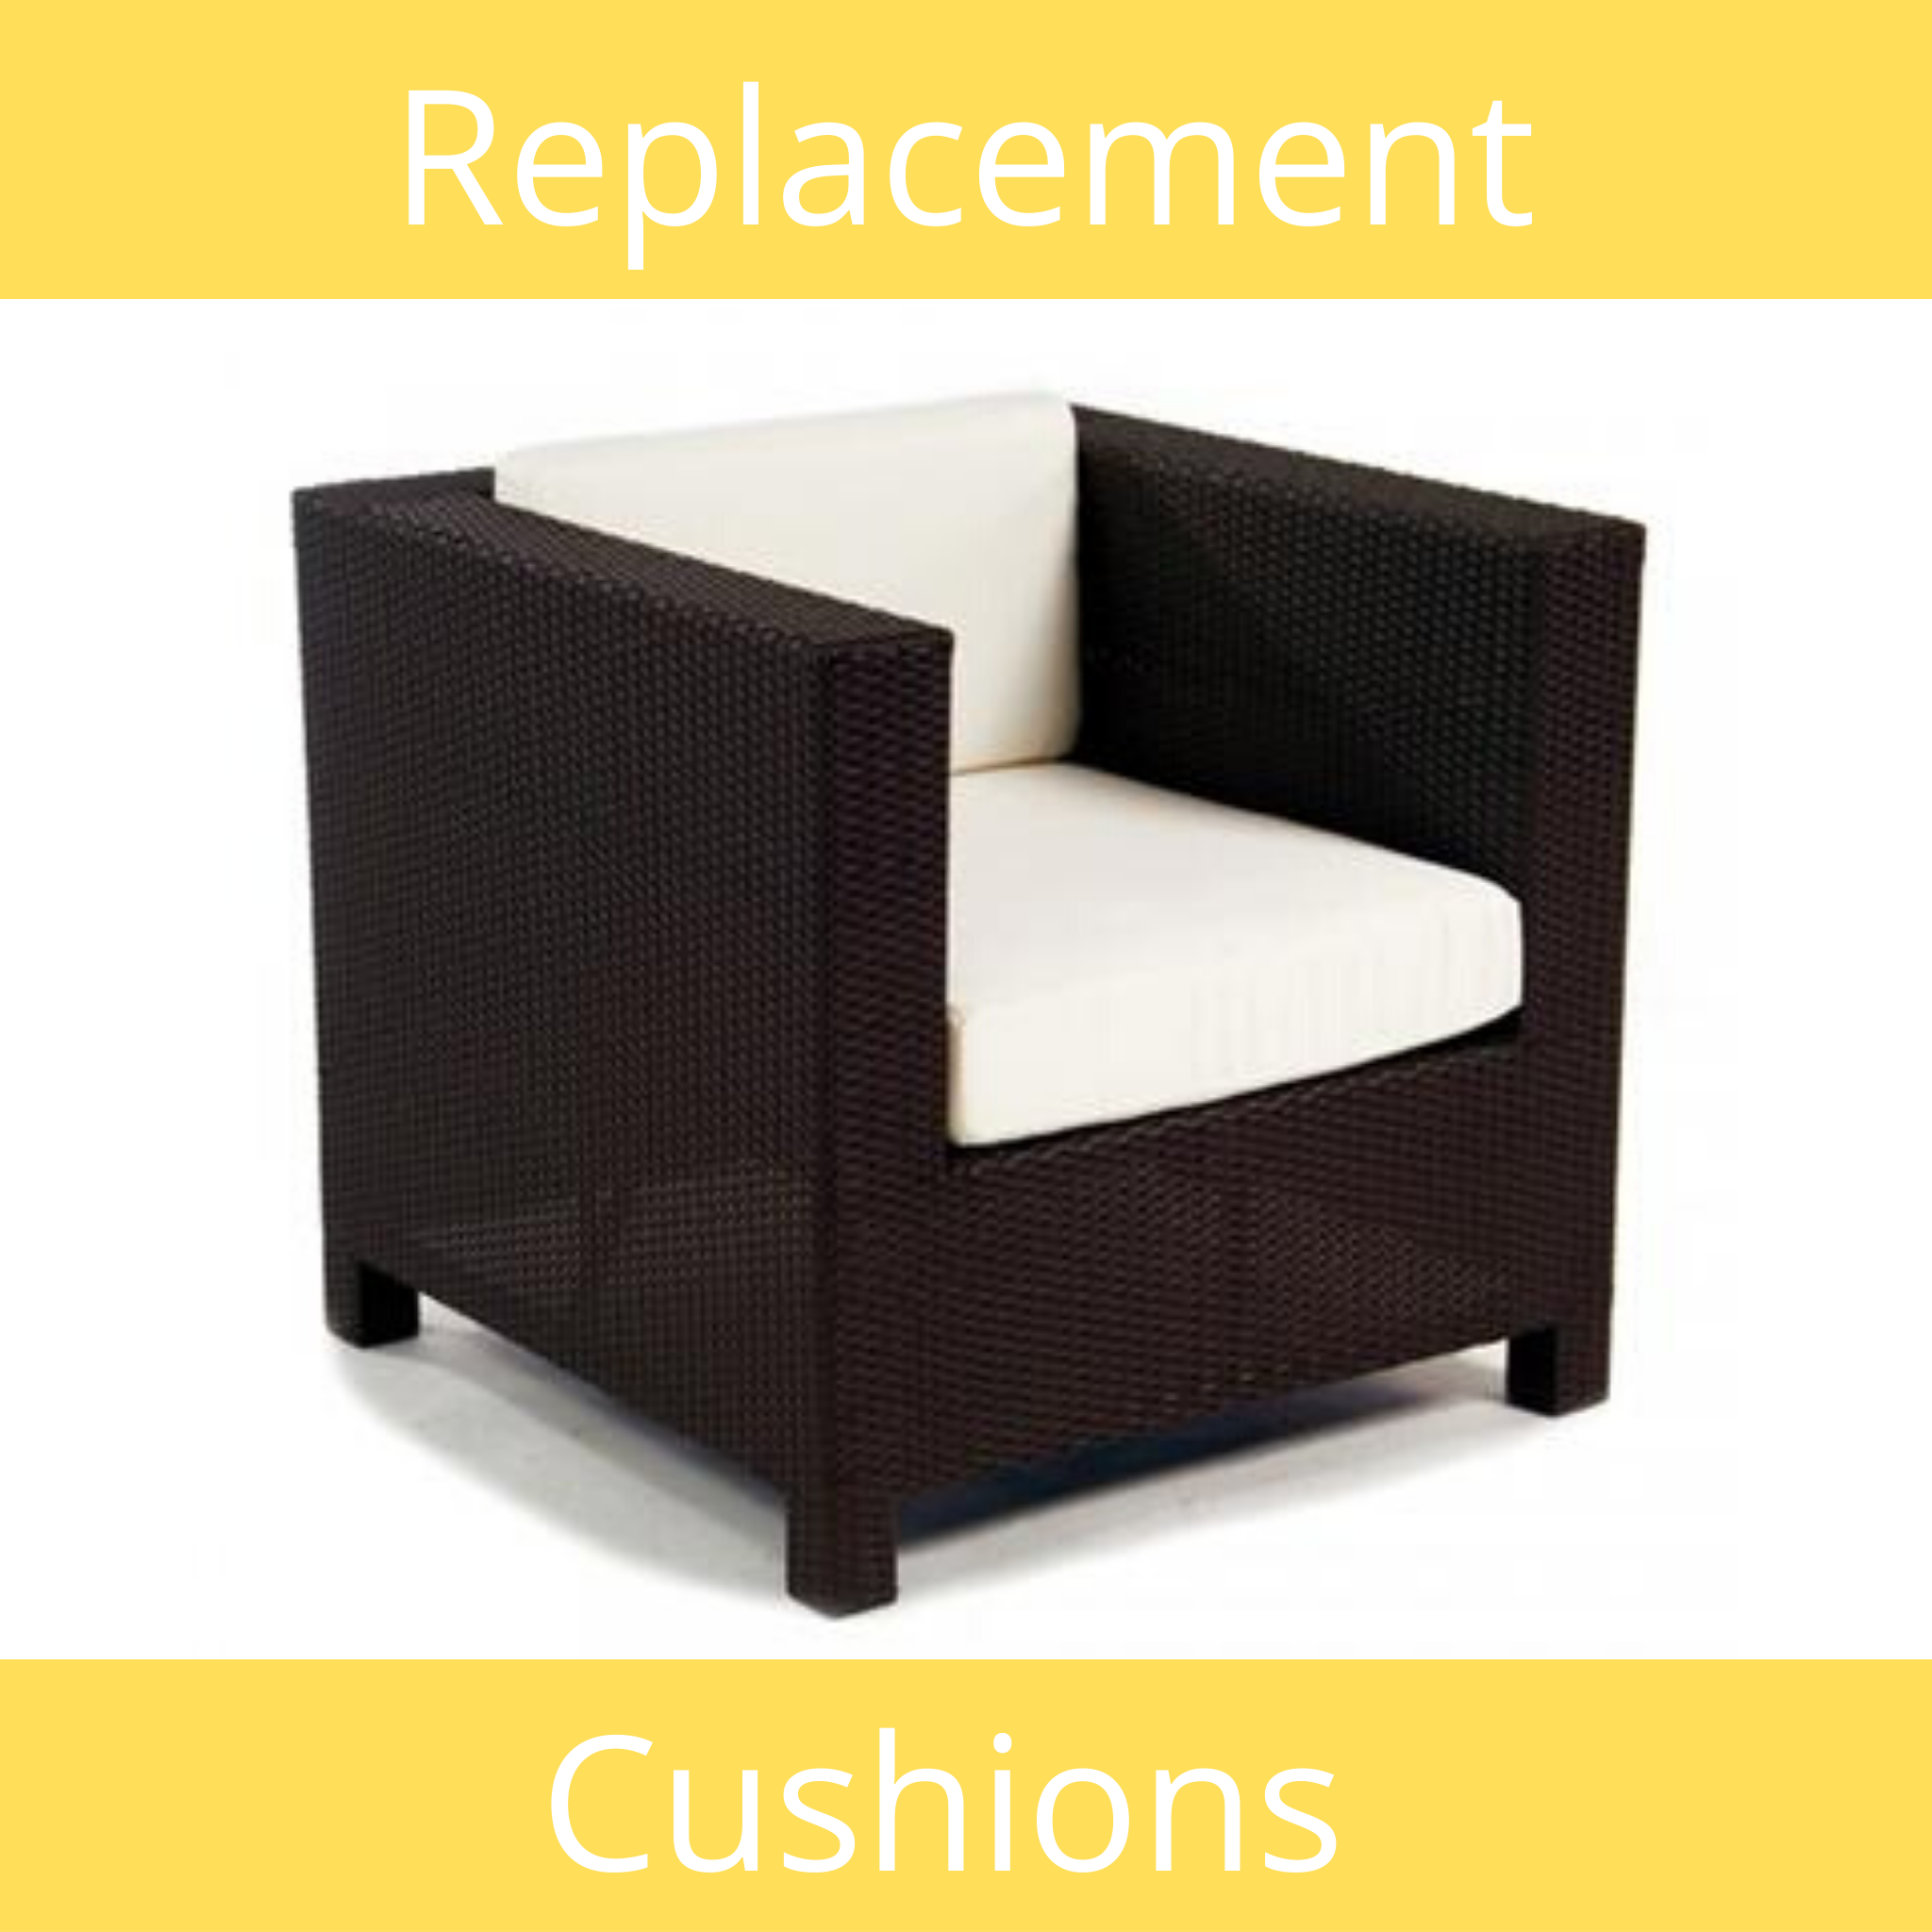 sunbrella replacement cushions lowes